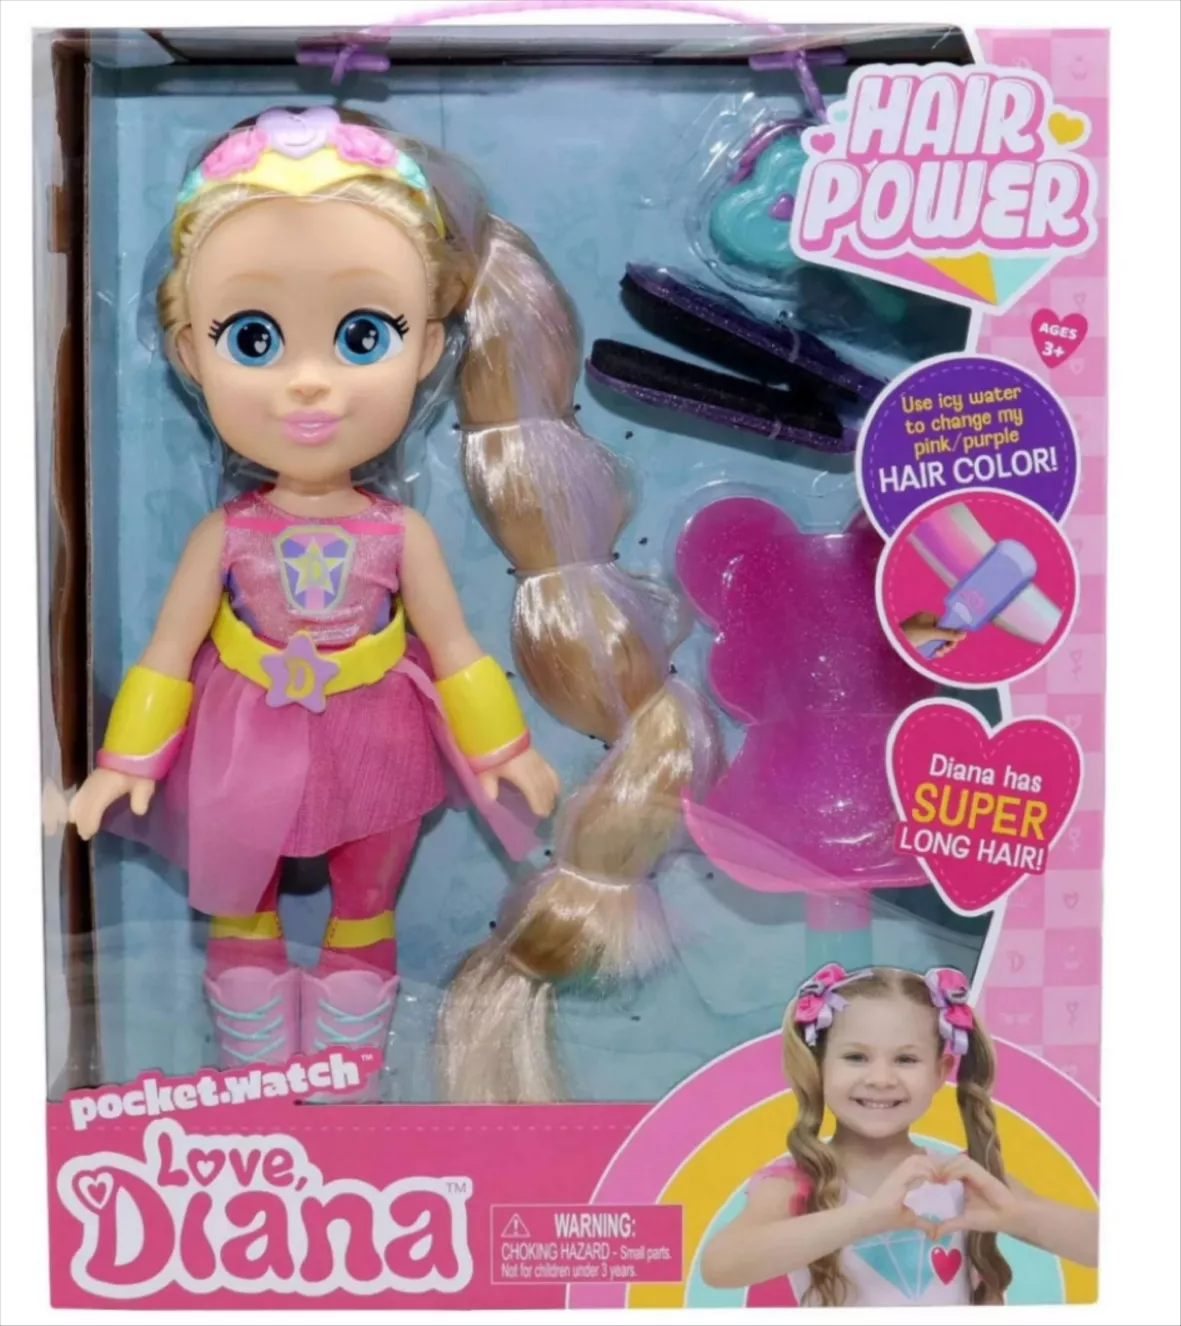 Get to know more about  Channel Kids Star Diana from Kids